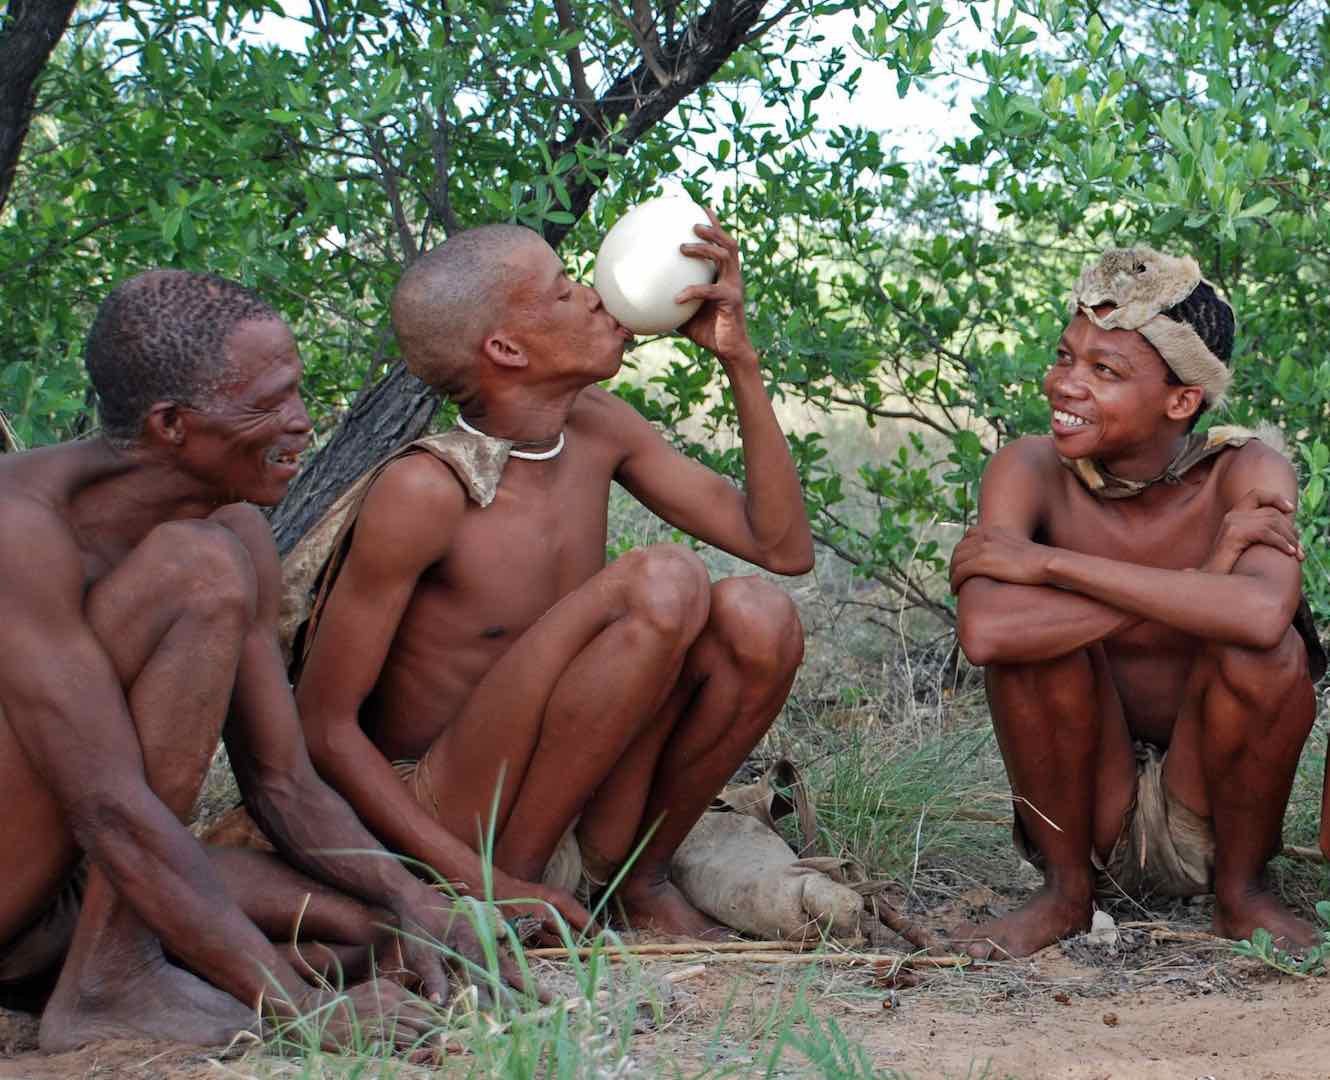 San-People-cropped-free-from-Pixabay